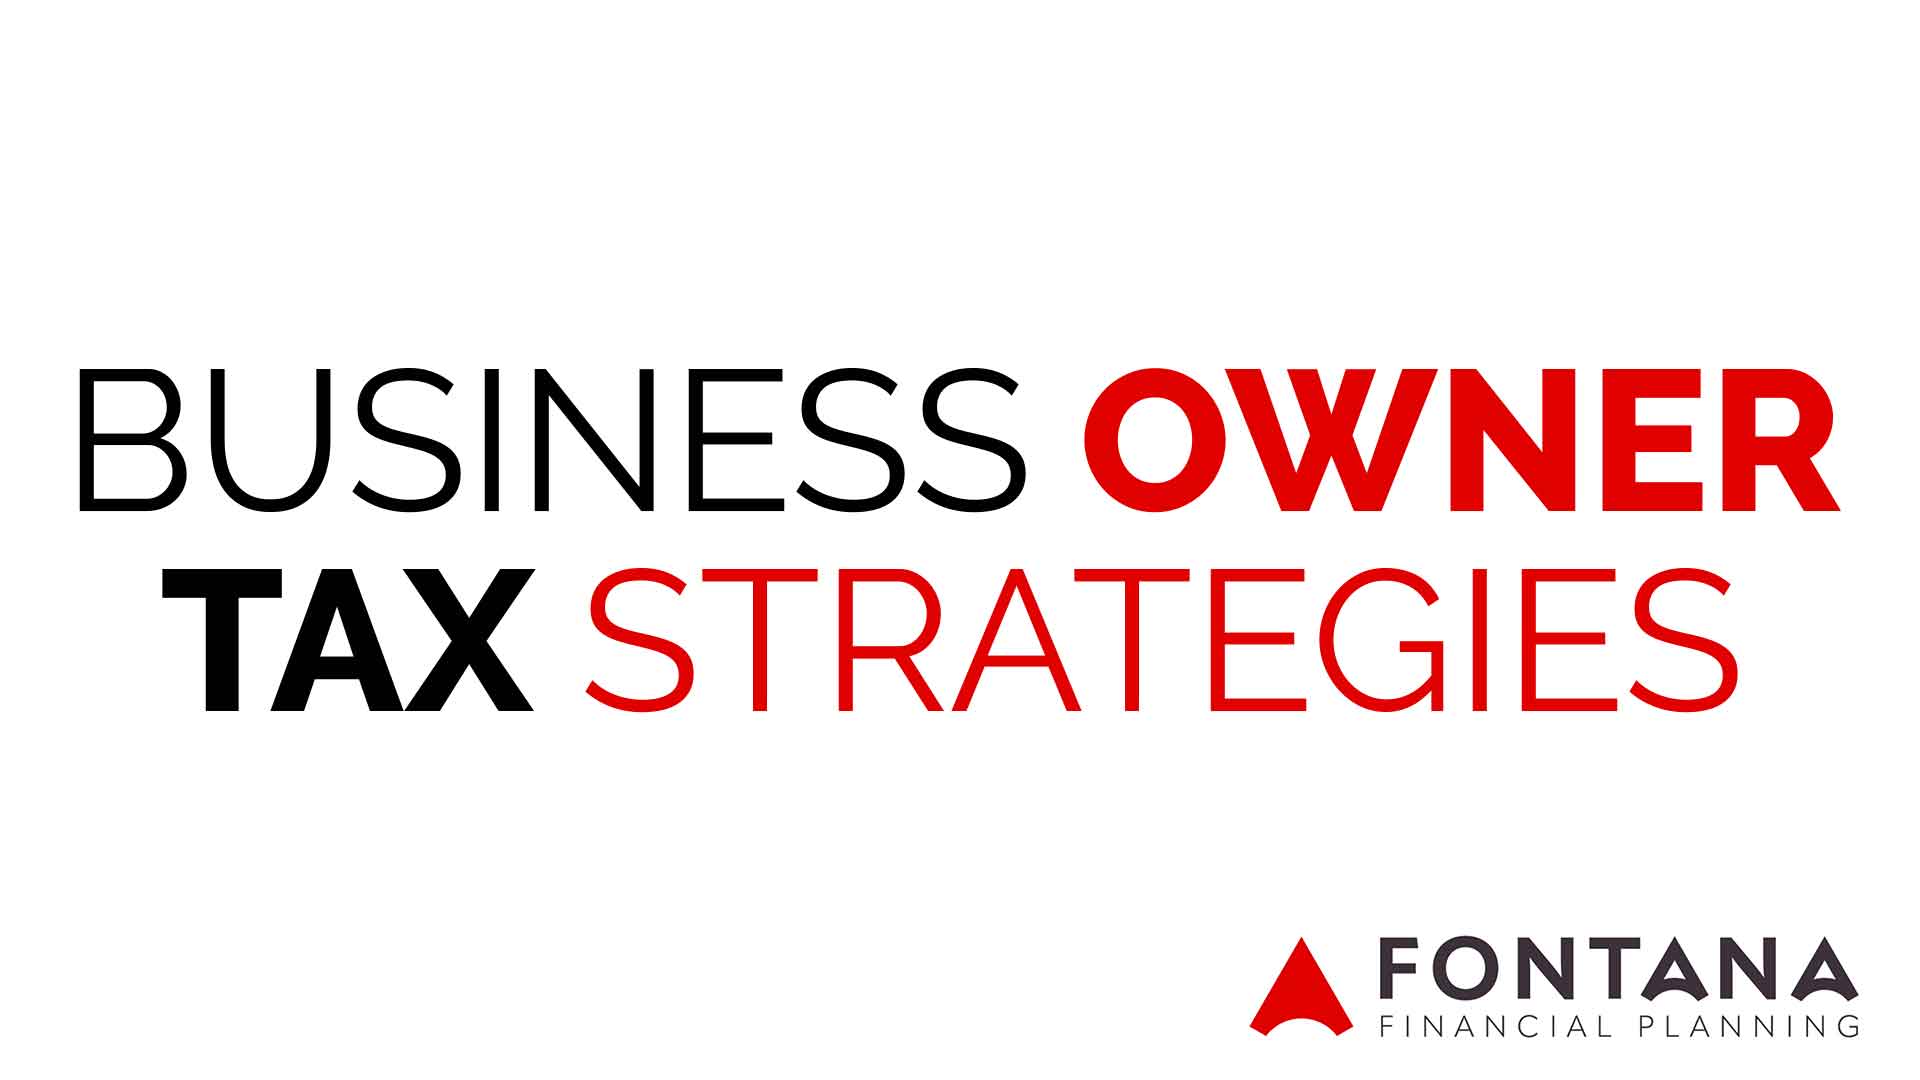 Business Owner Tax Strategies